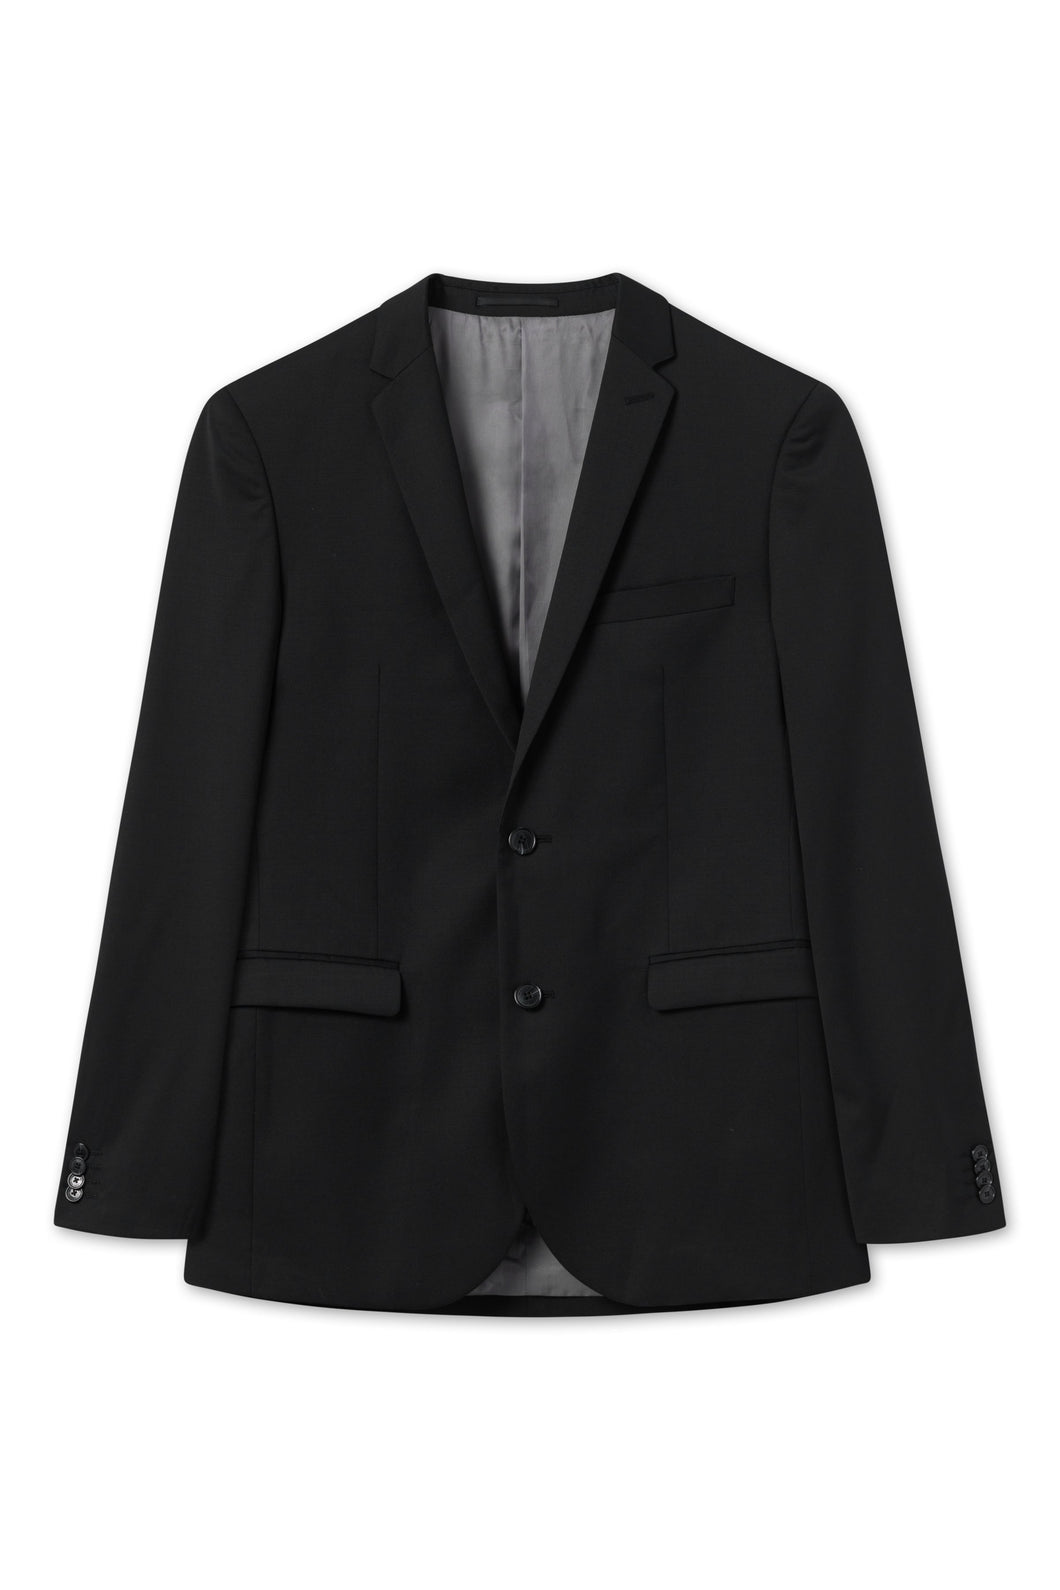 Matinique - George F Stretch Suit Jacket